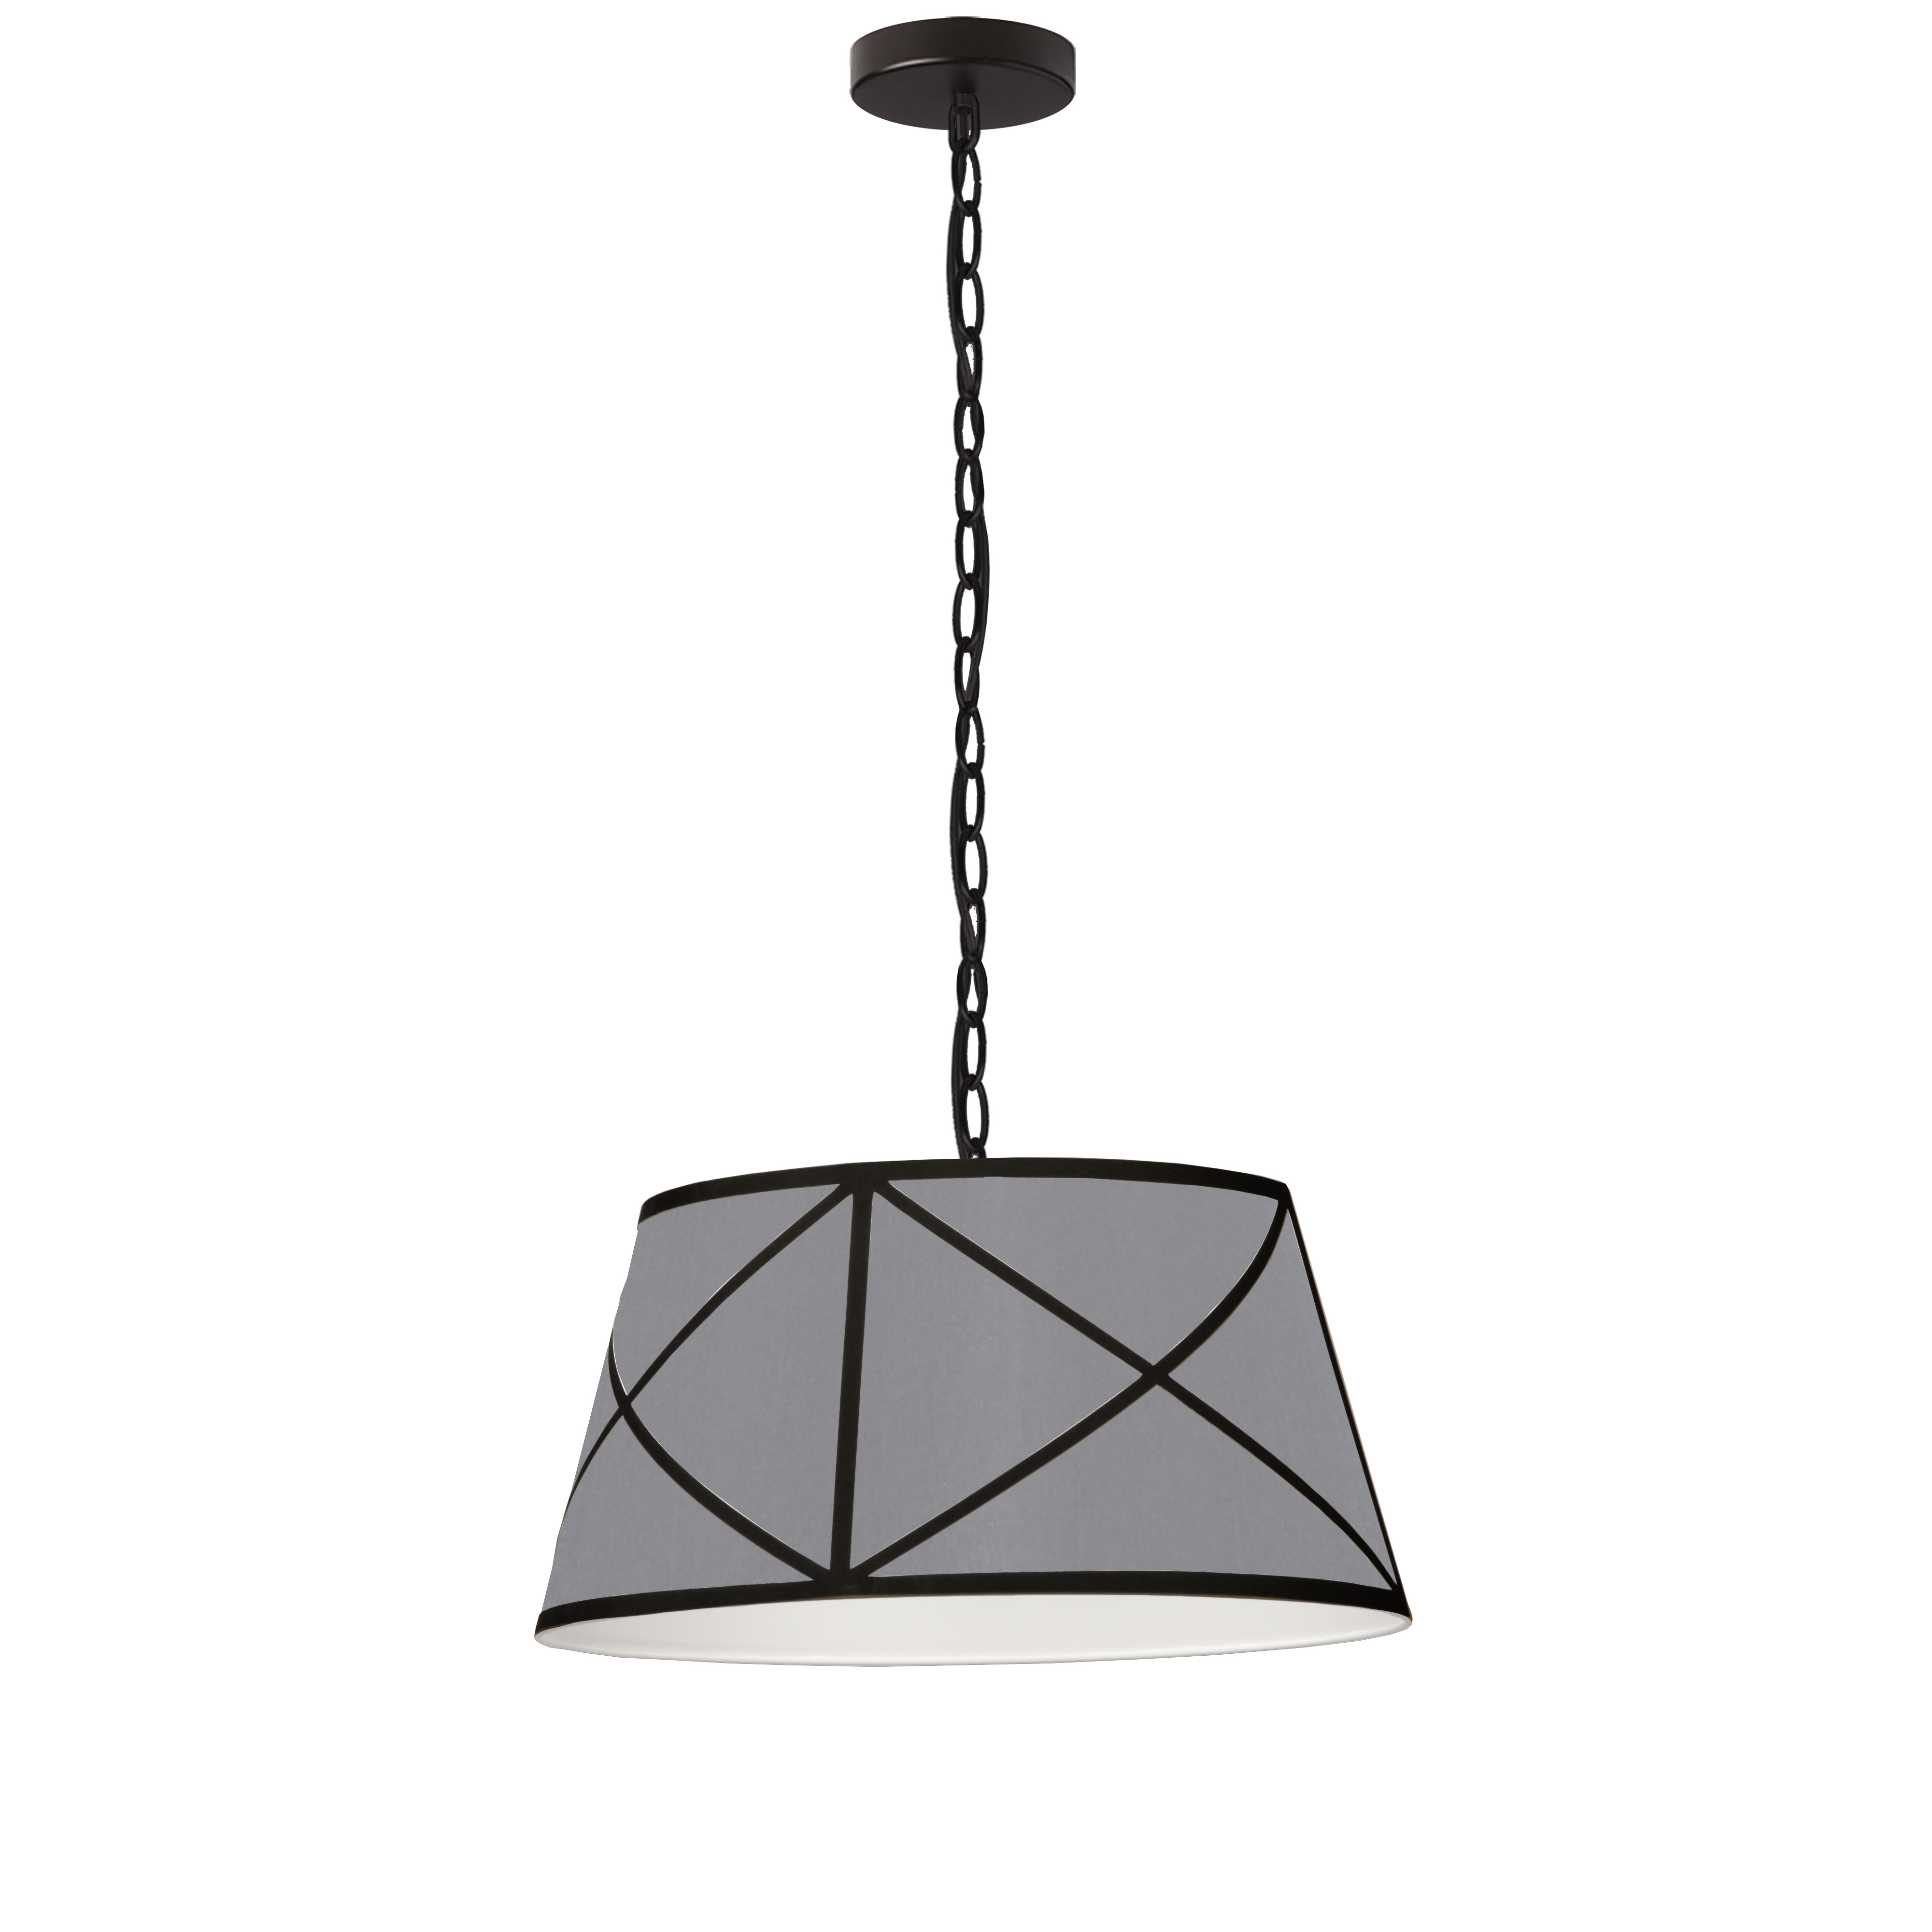 1LT Incandescent Pendant, MB w/ GRY & BK Shade